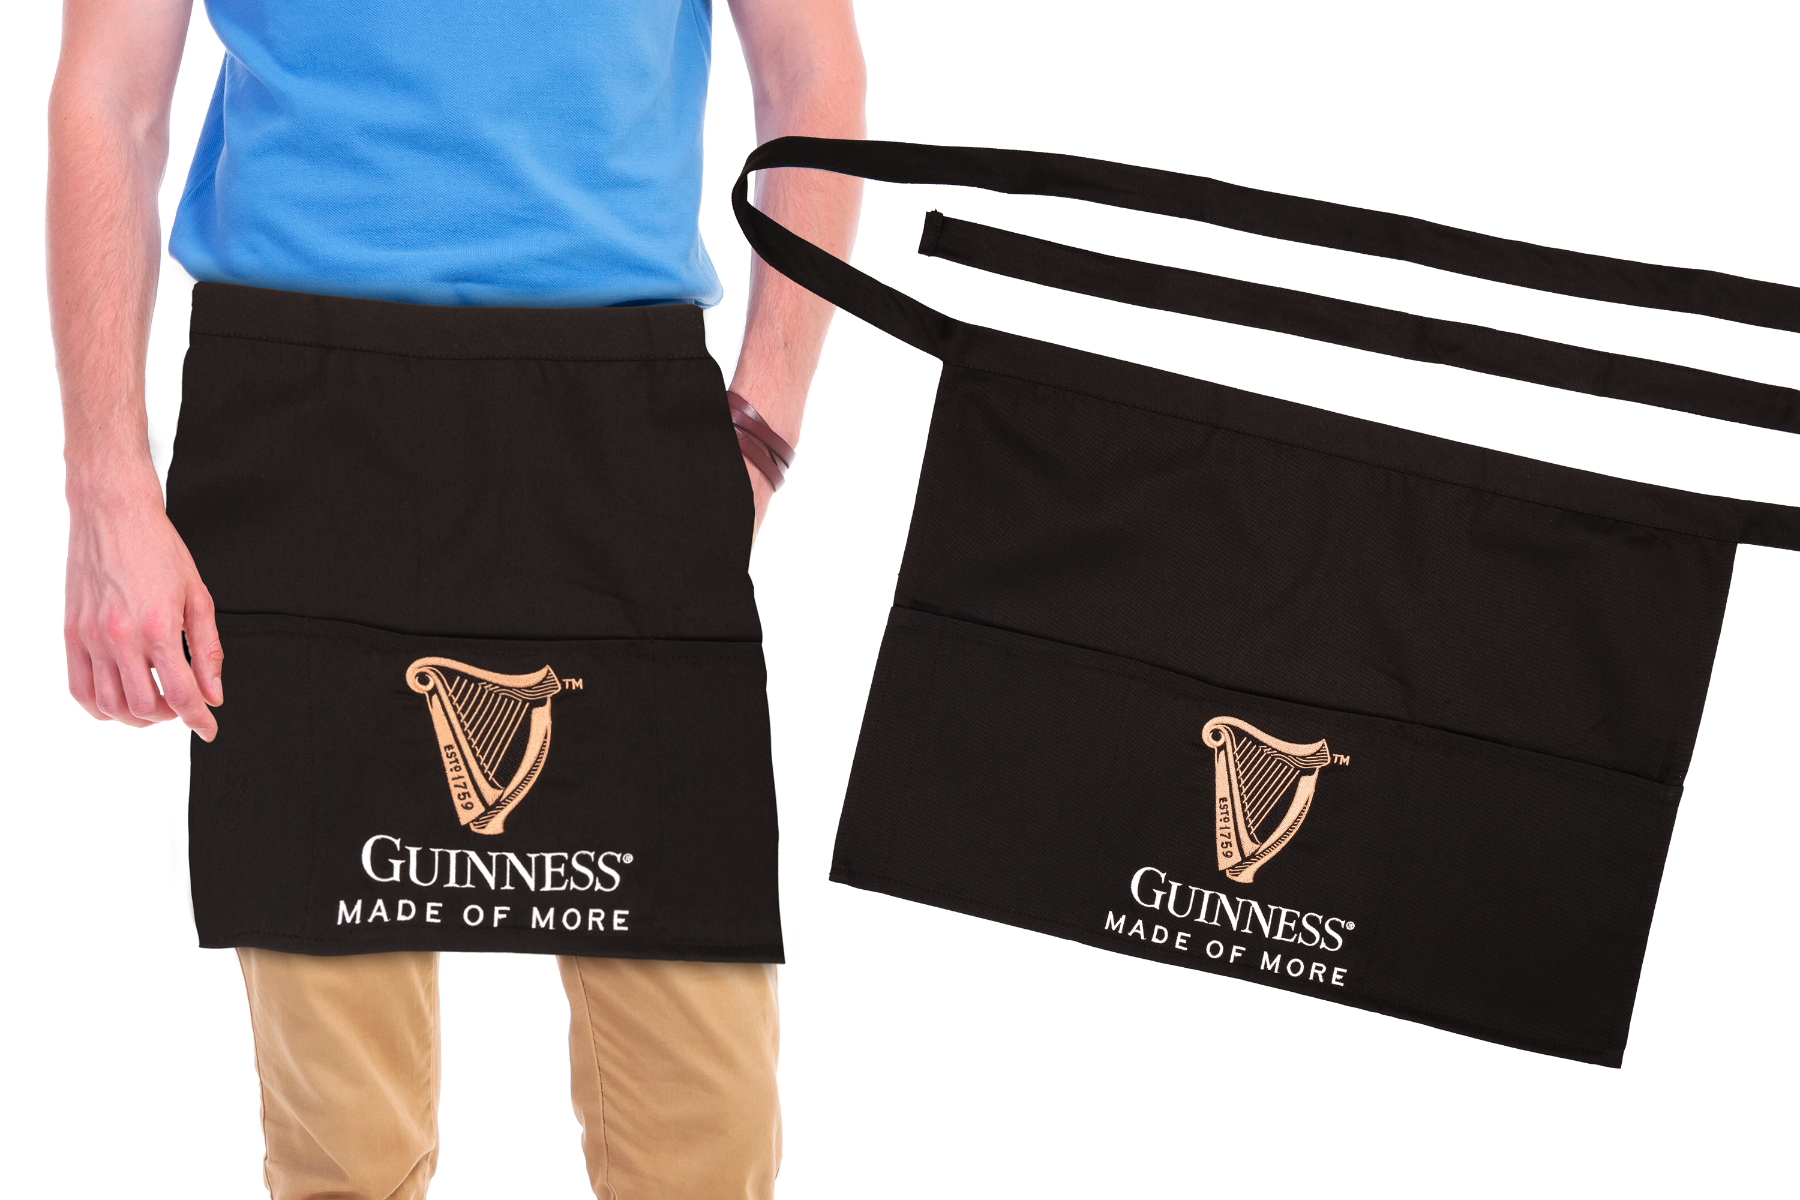 Guinness Half Apron, perfect for BBQ enthusiasts with a prominent Guinness logo.